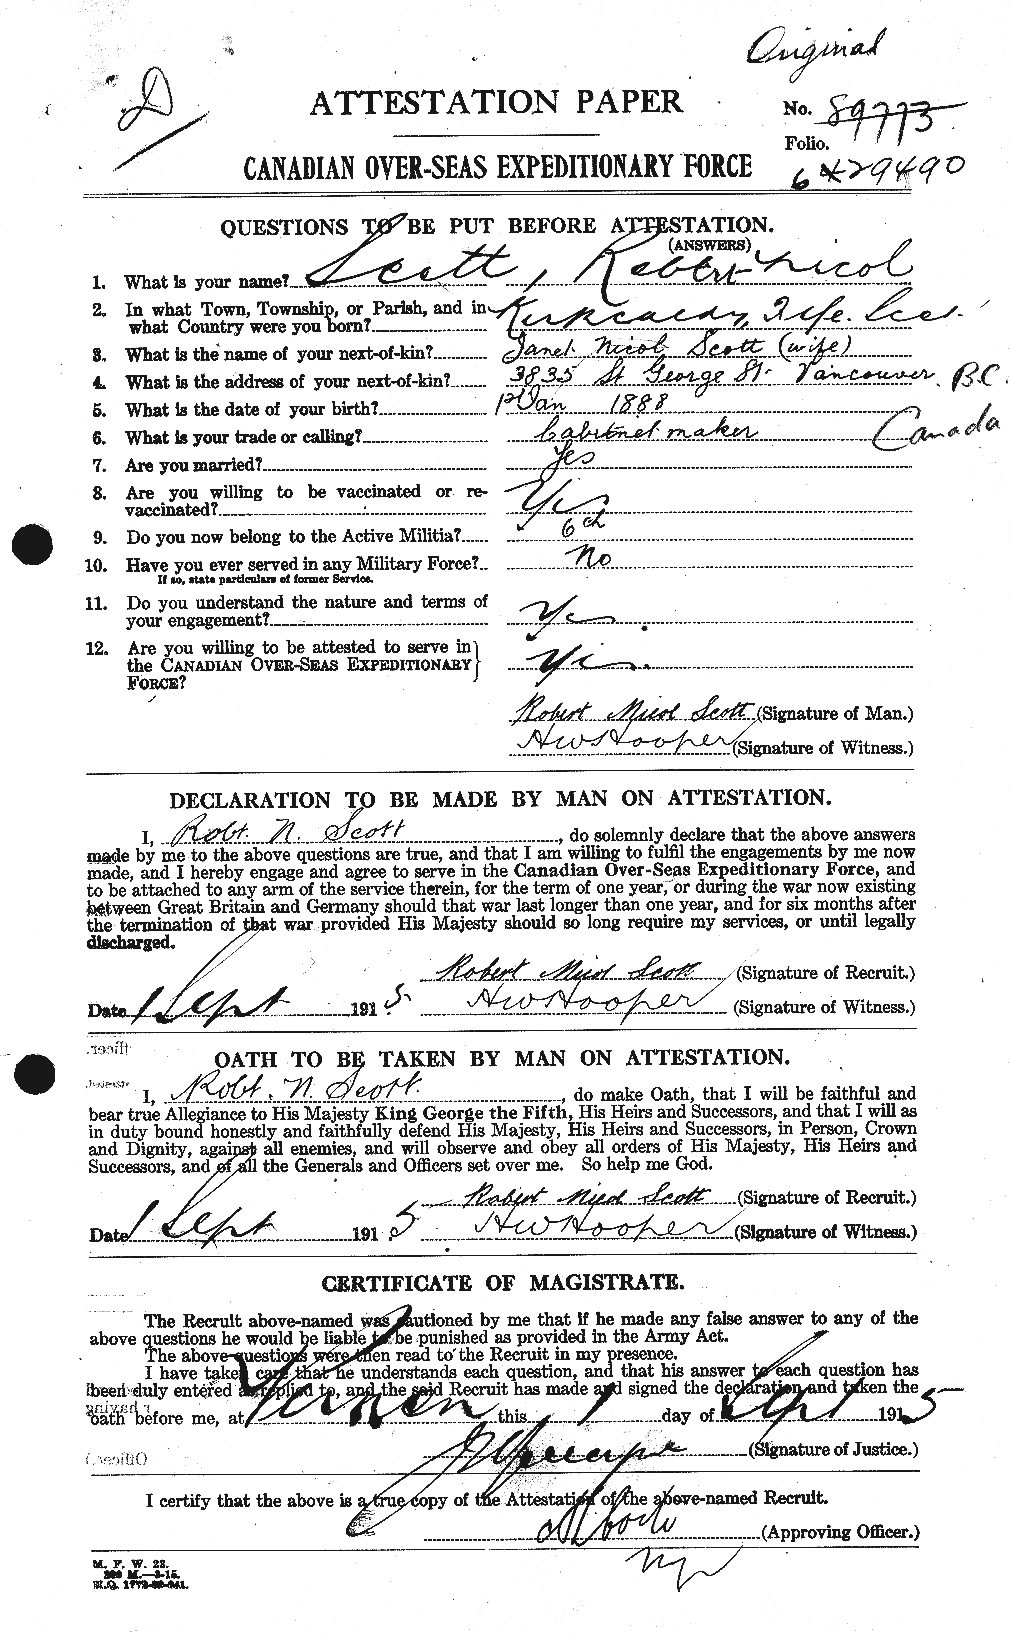 Personnel Records of the First World War - CEF 089122a